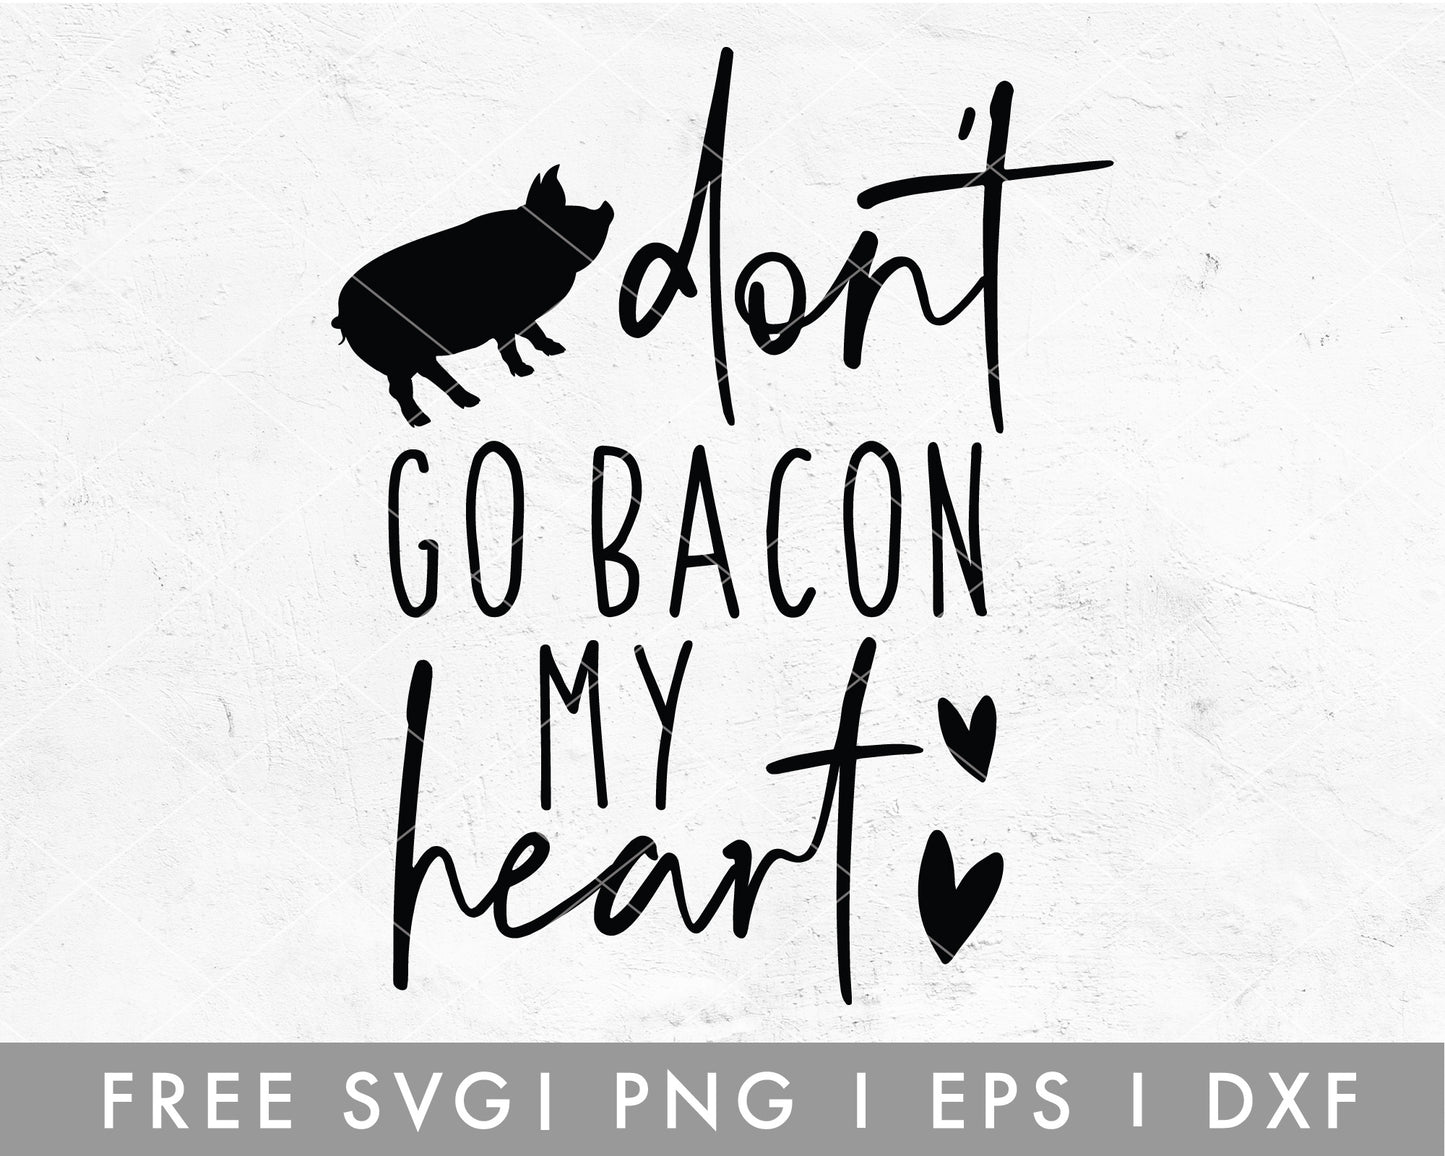 FREE Don’t Go Bacon My Heart SVG Cut File for Cricut, Cameo Silhouette | Free SVG, PNG, Vector